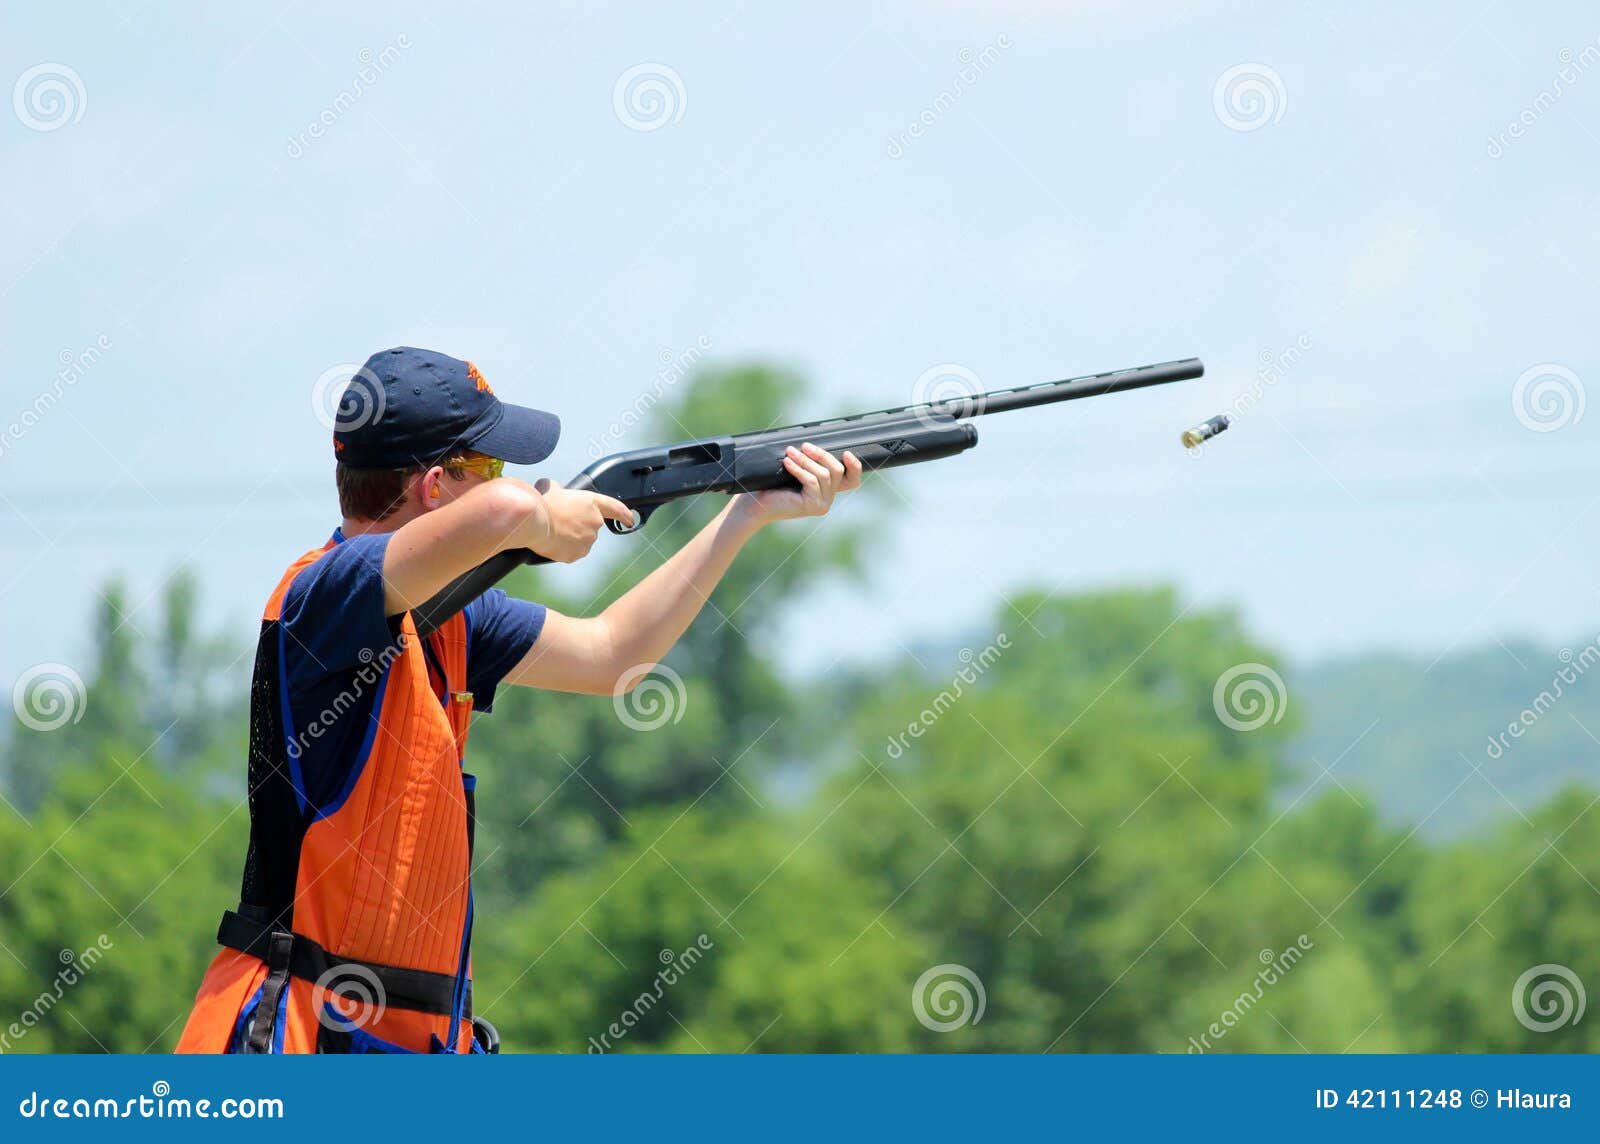 young man skeet shooting with airborne shell